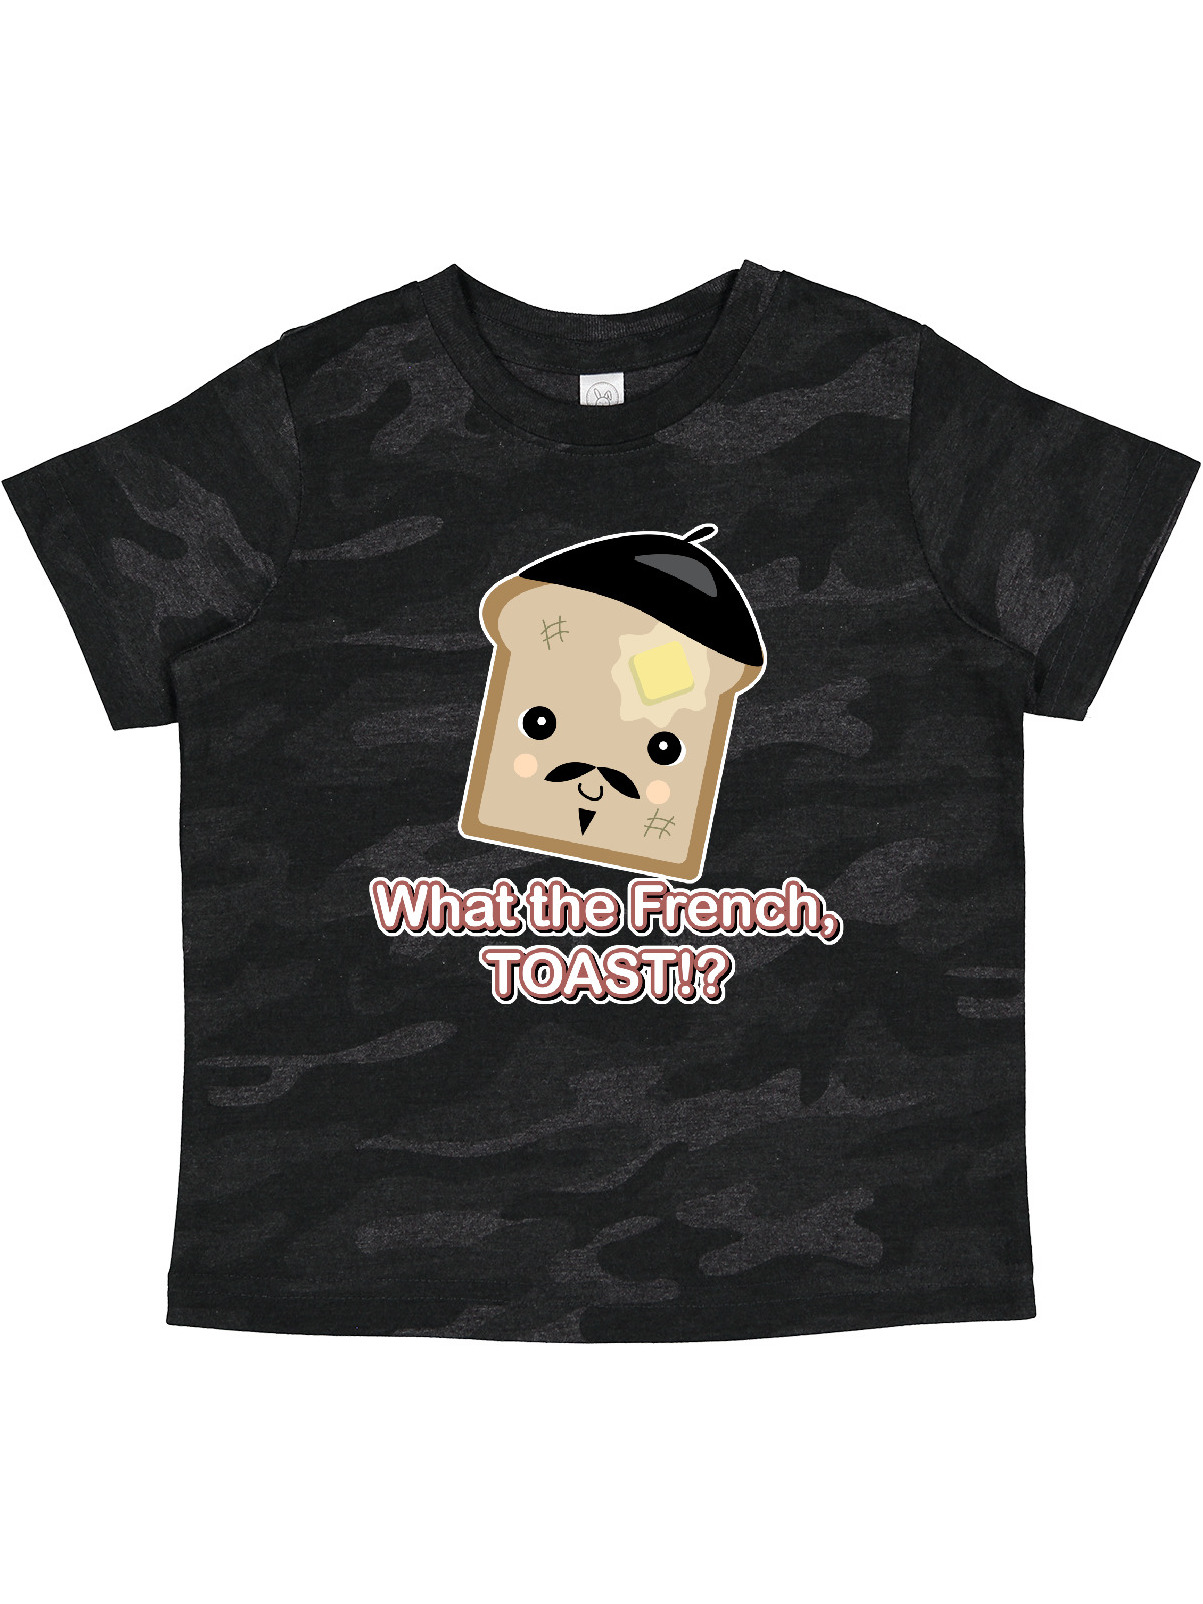 Inktastic Funny Cute Kawaii What the French Toast Design Boys Toddler T-Shirt - image 1 of 4